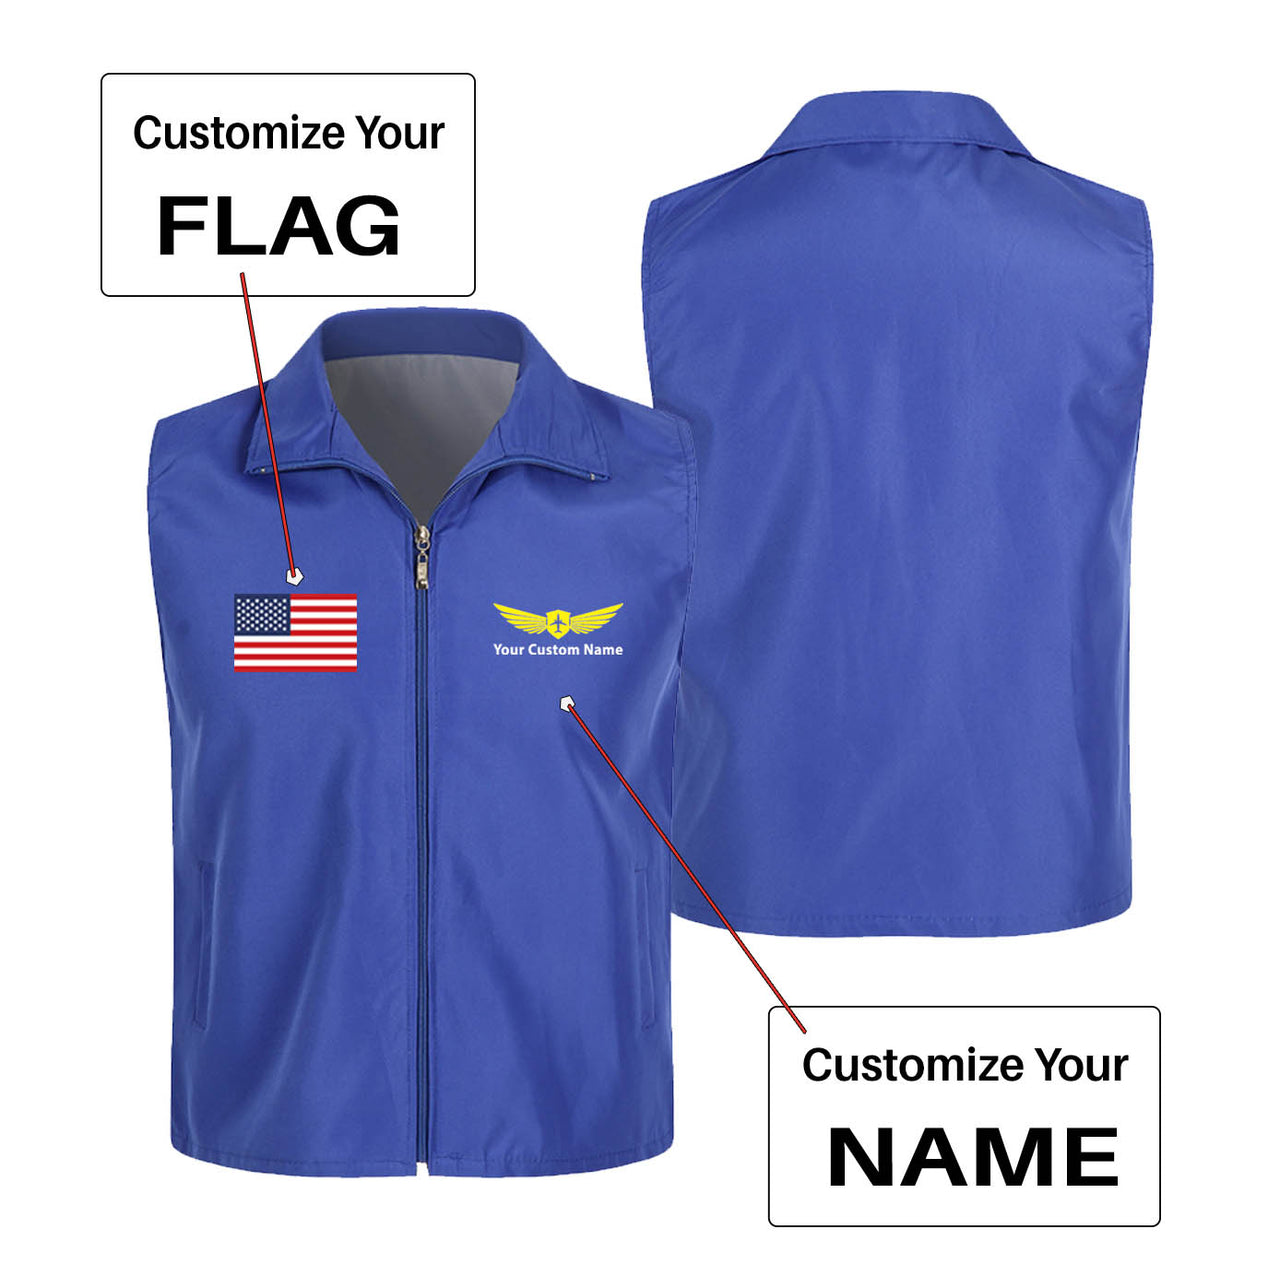 Custom Flag & Name with "Badge 2" Designed Thin Style Vests